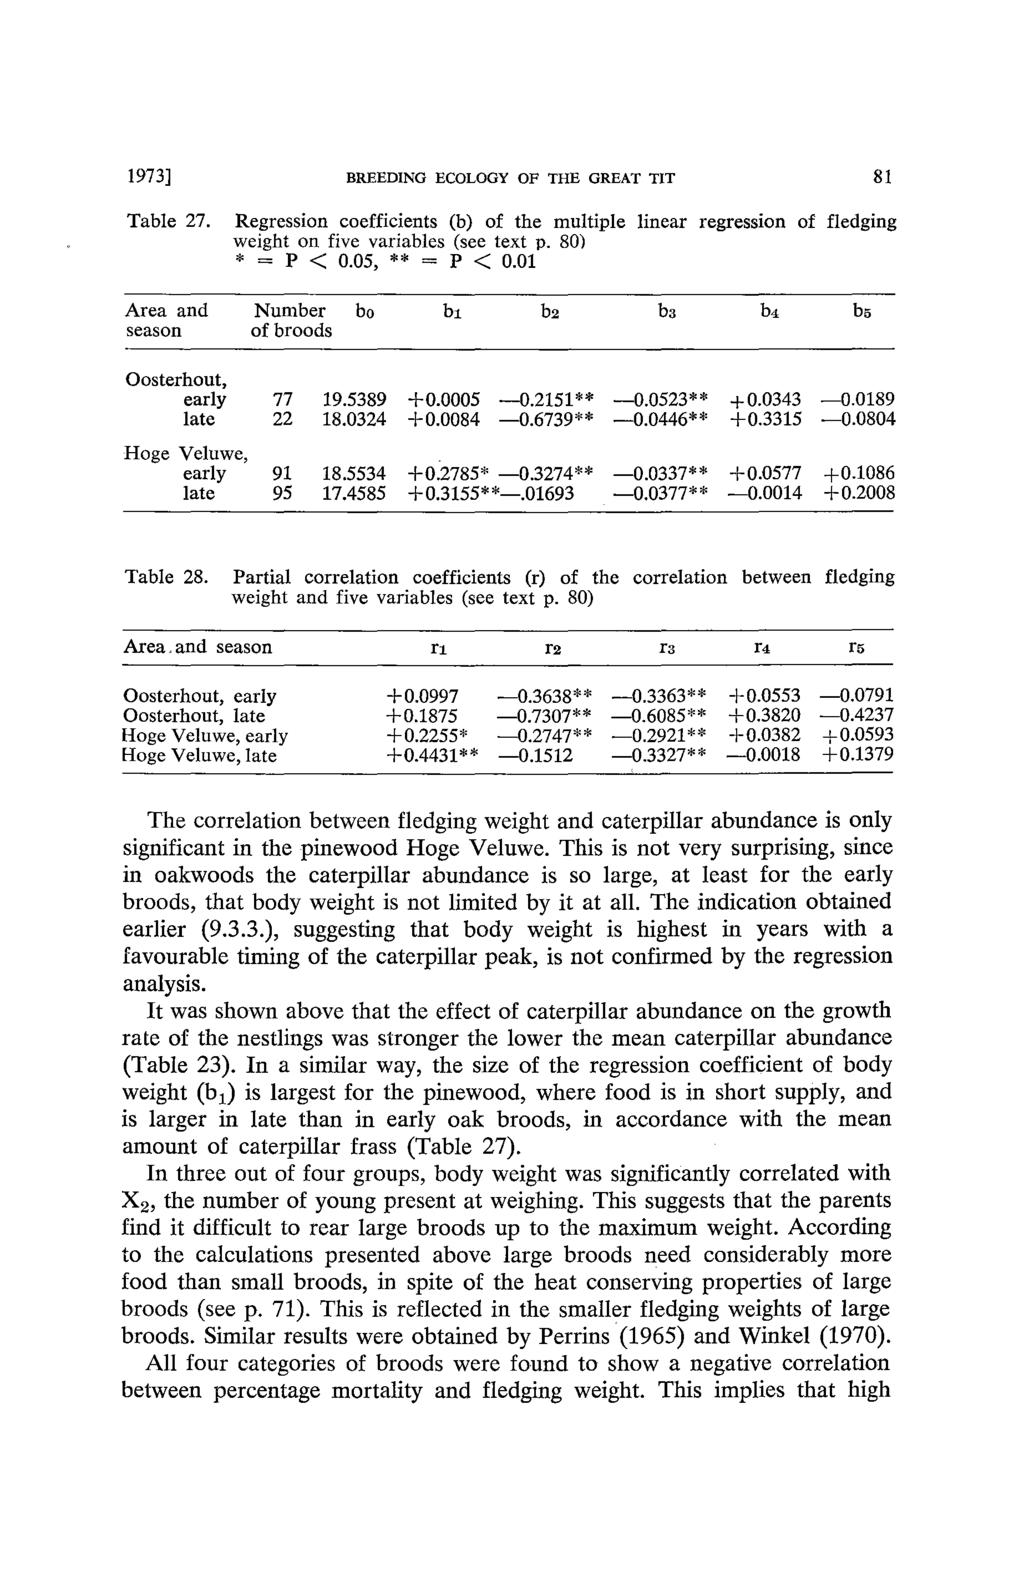 1973] BREEDING ECOLOGY OF THE GREAT TIT 81 Table 27. Regression coefficients (b) of the multiple linear regression of fledging weight on five variables (see text p. 80) * = P < 0.05, ** = P < 0.